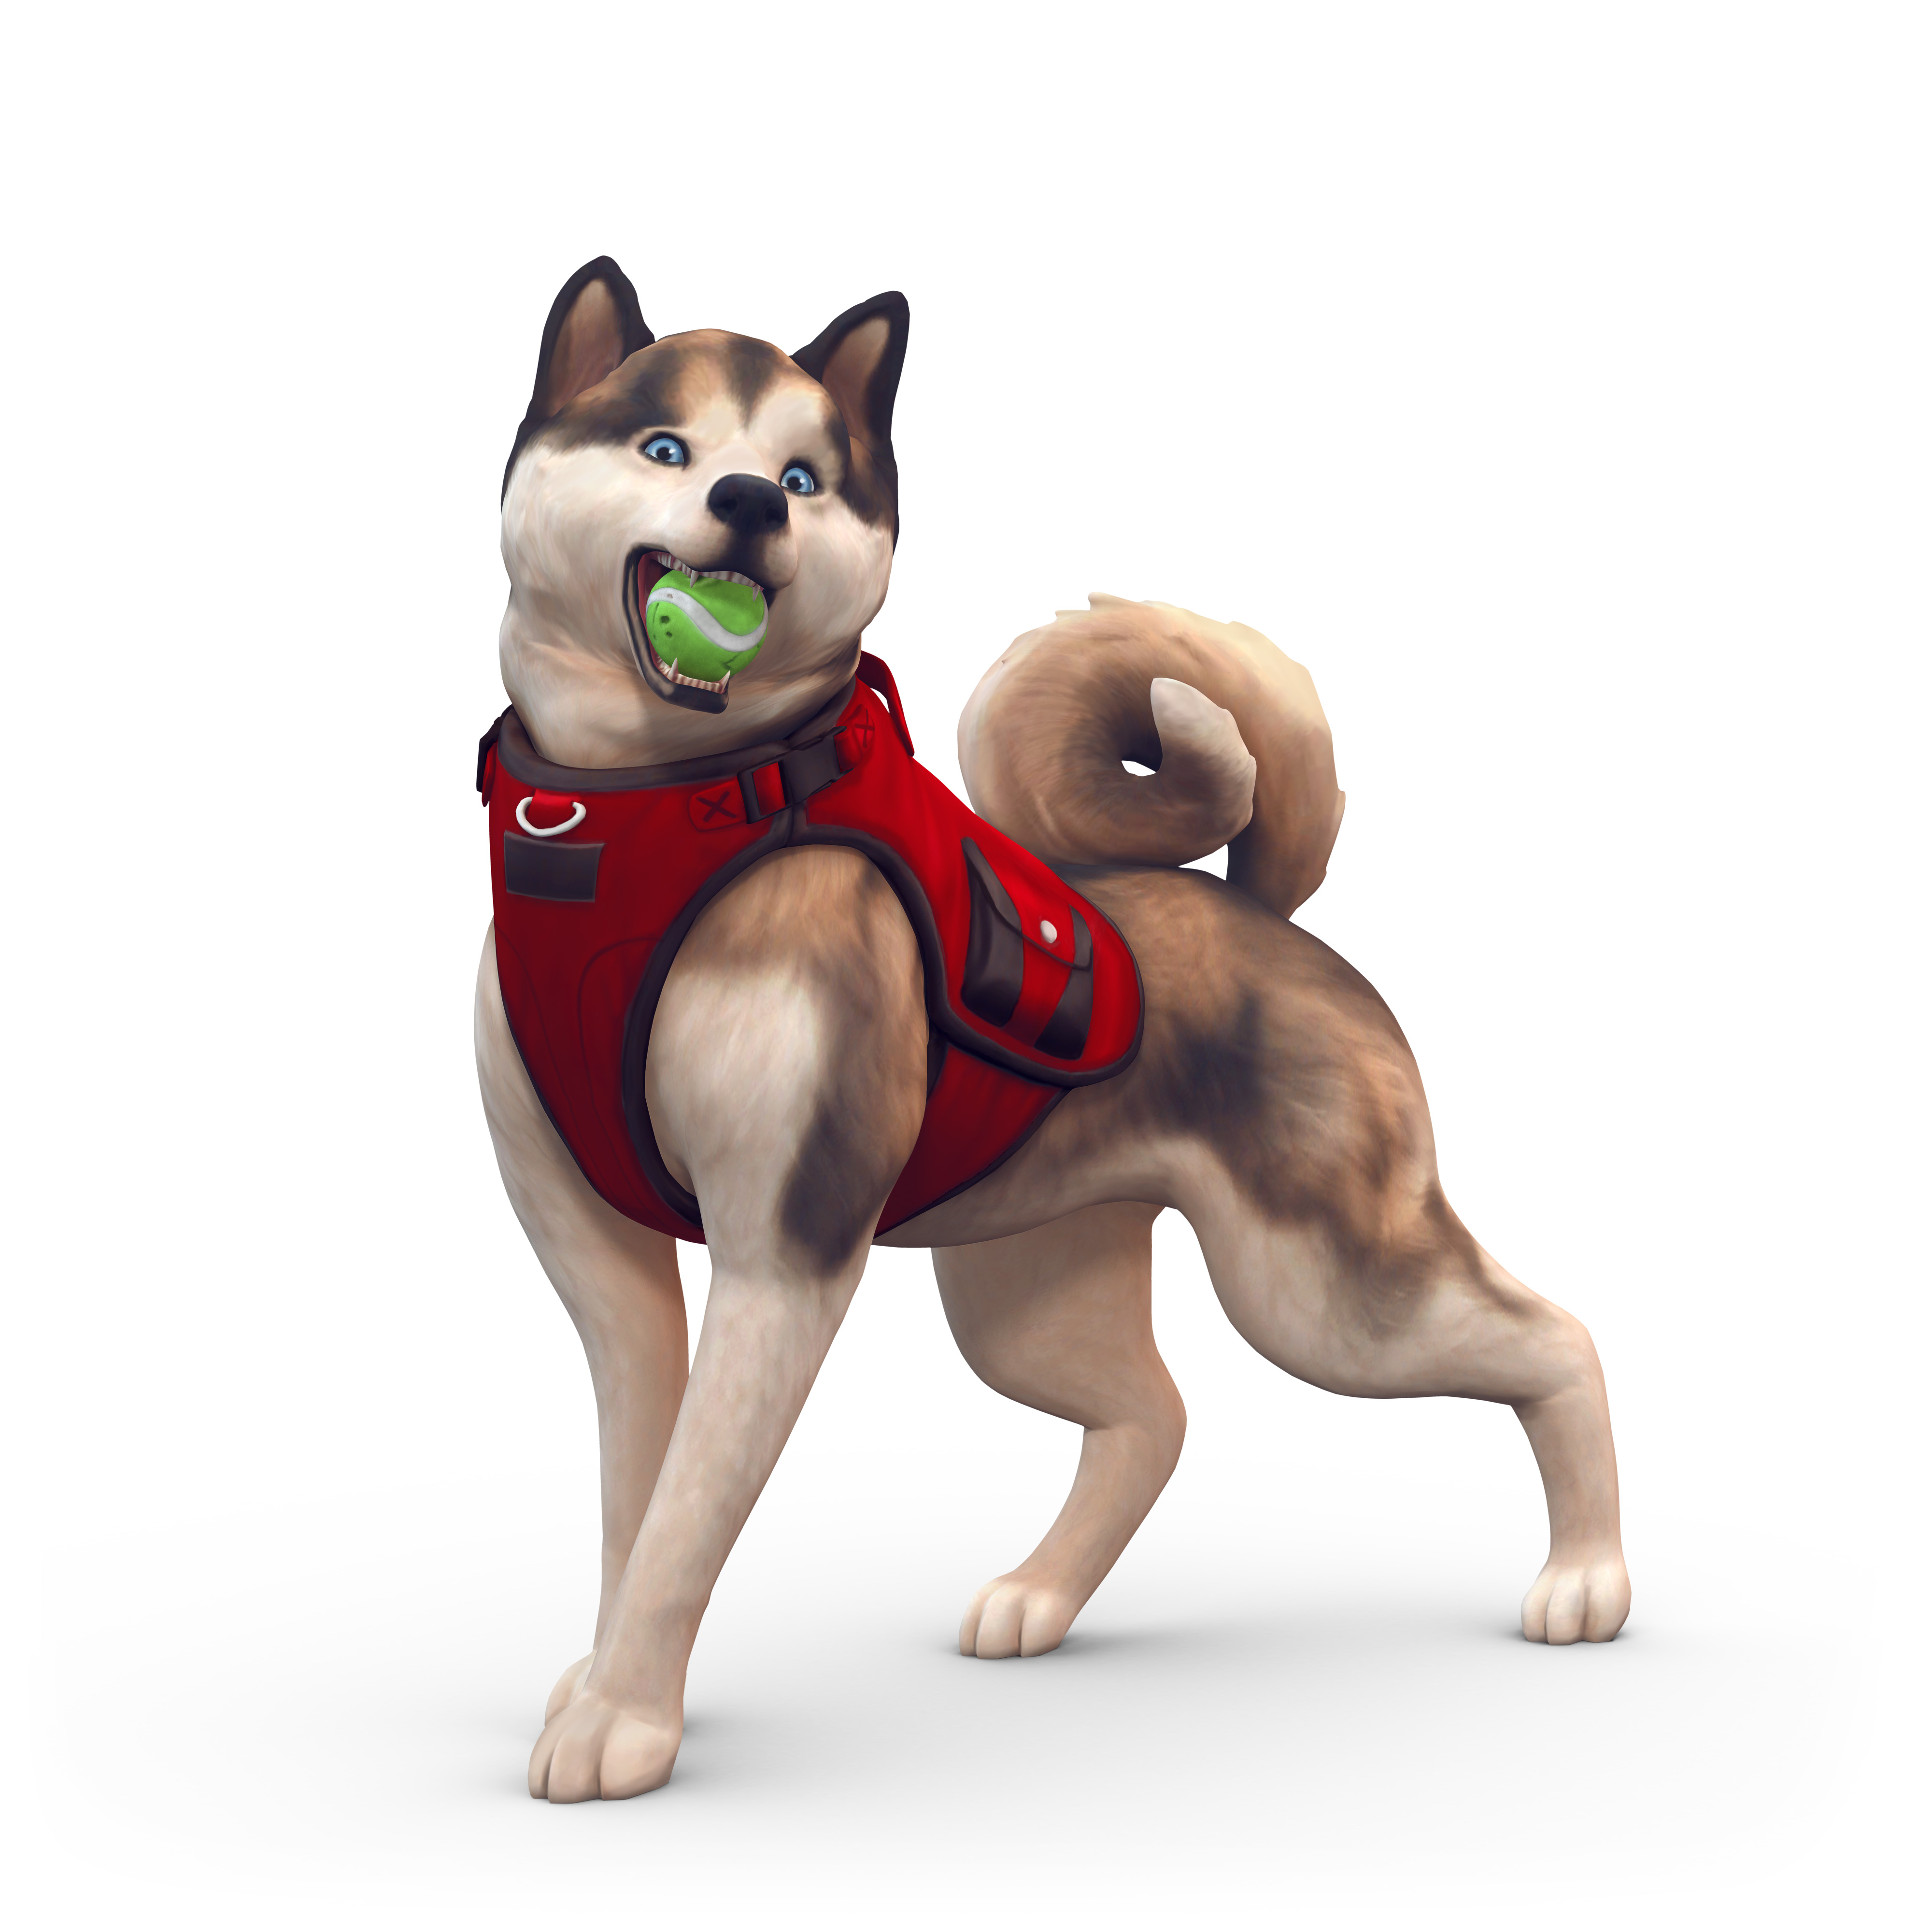 sims 4 cats and dogs code generator